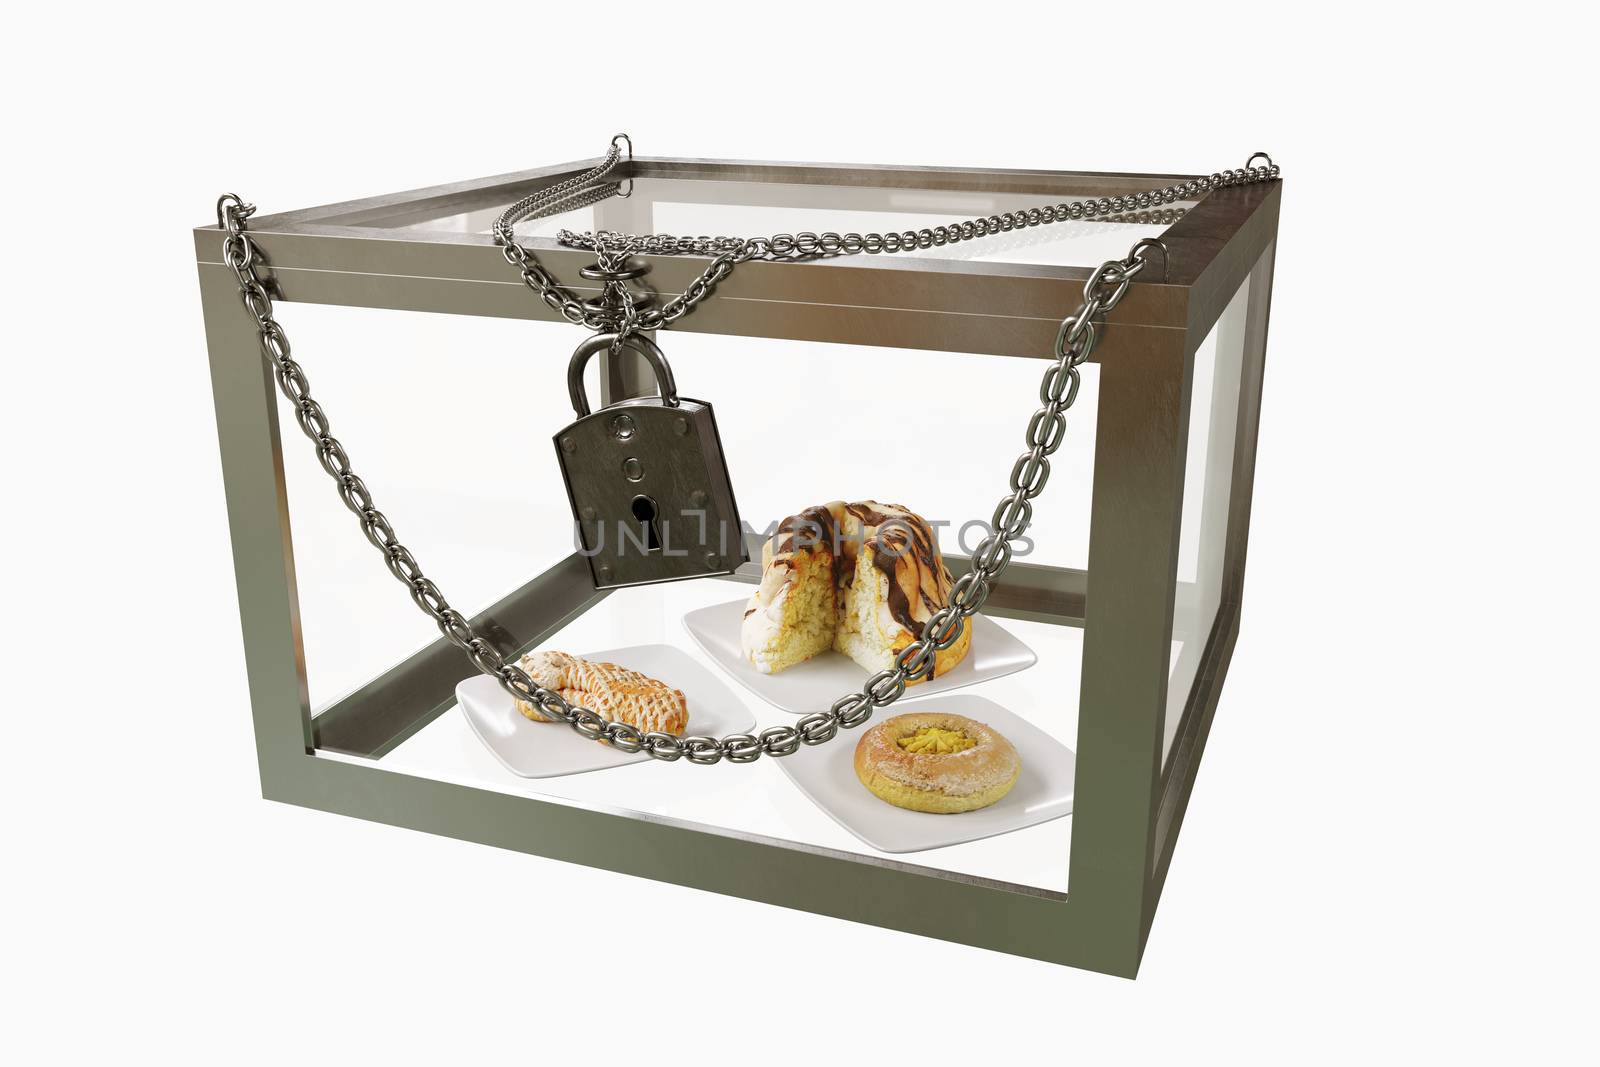 cakes in close metal box with chains diet concept composition photo by denisgo